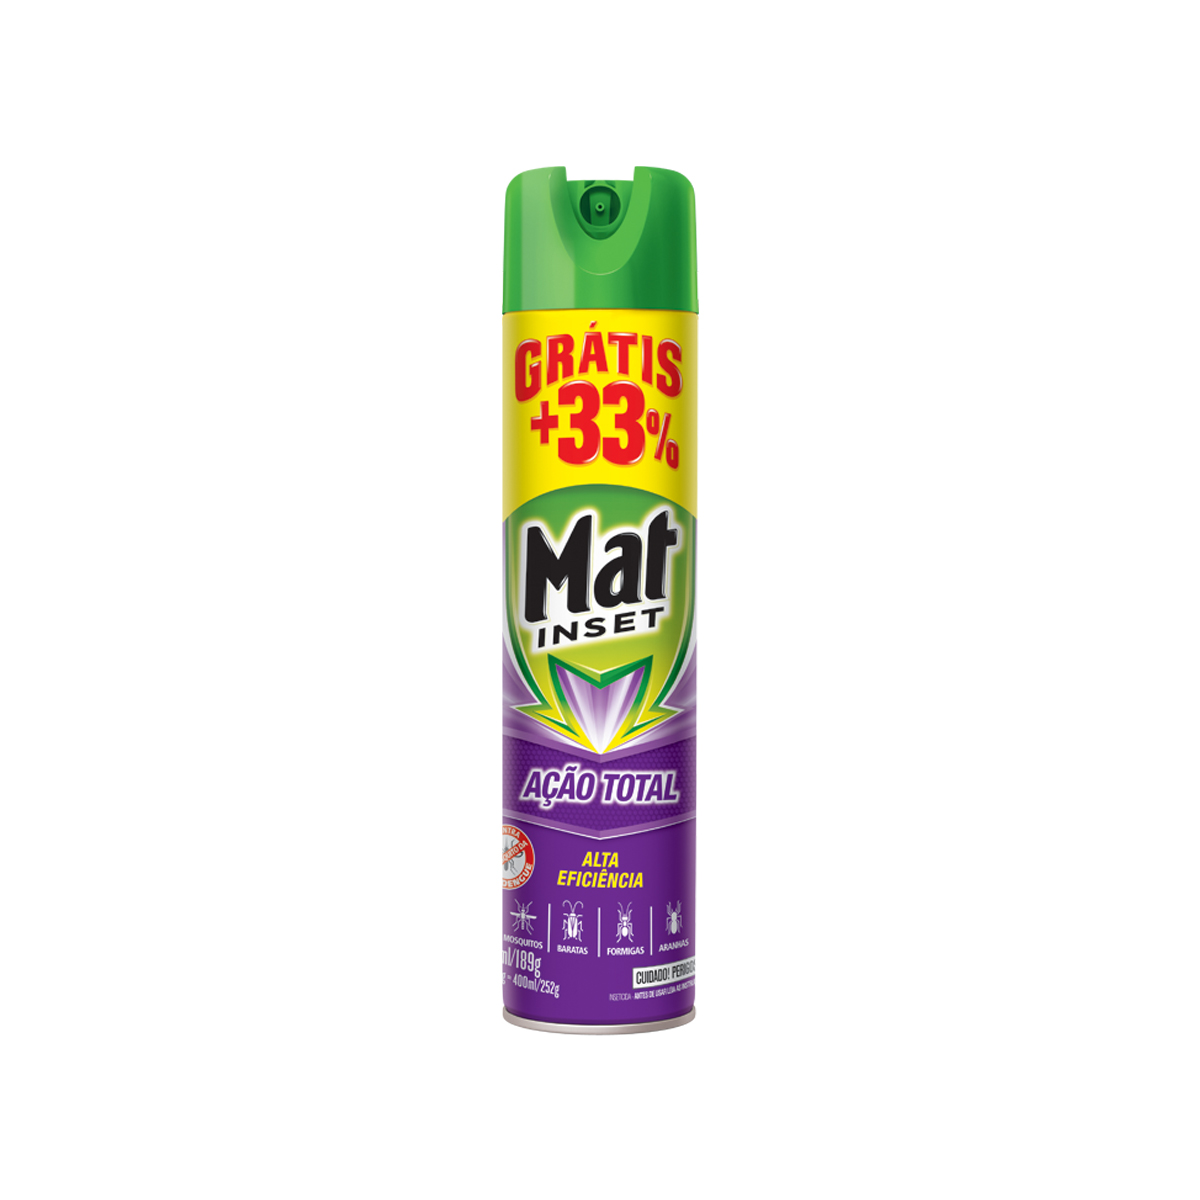 INS MAT INSET 360ML ACAO TOTAL PROMO0 GT33%